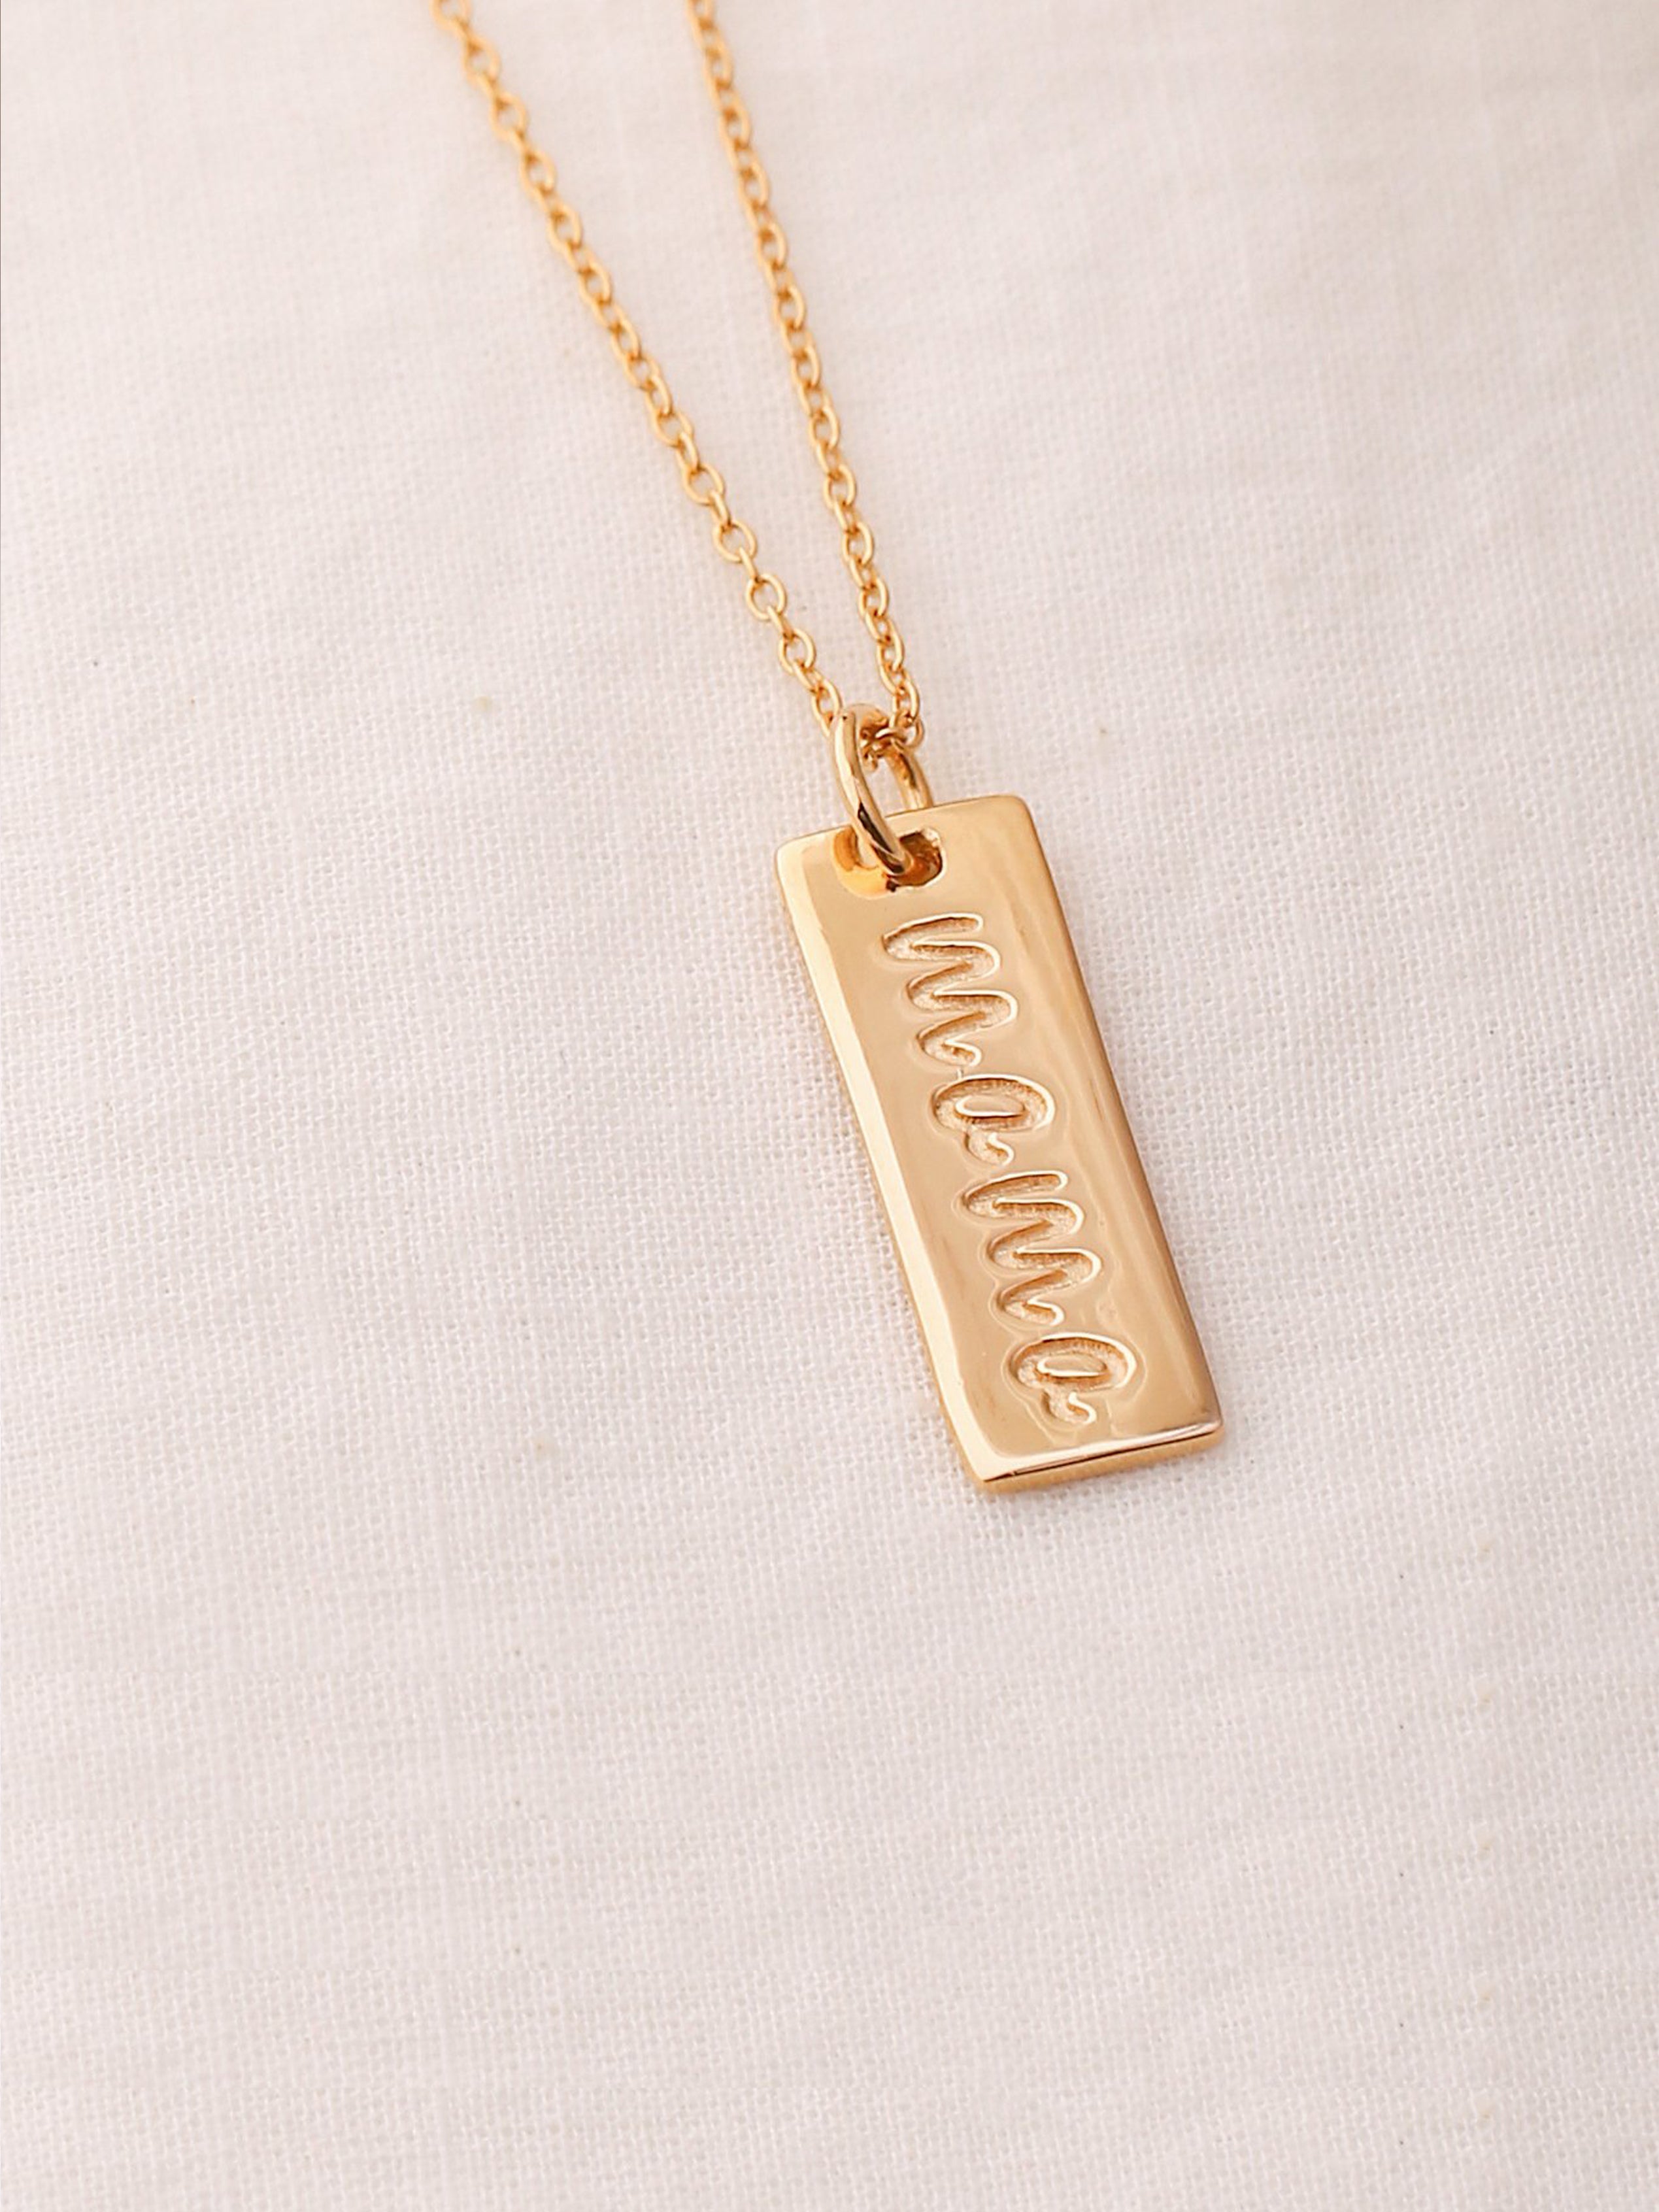 Charm Mama Letter Vertical Bar Pendant Solid 925 Sterling Silver Gold Plated Chain Necklace Women Jewelry Gifts for Mother - YoTreasure